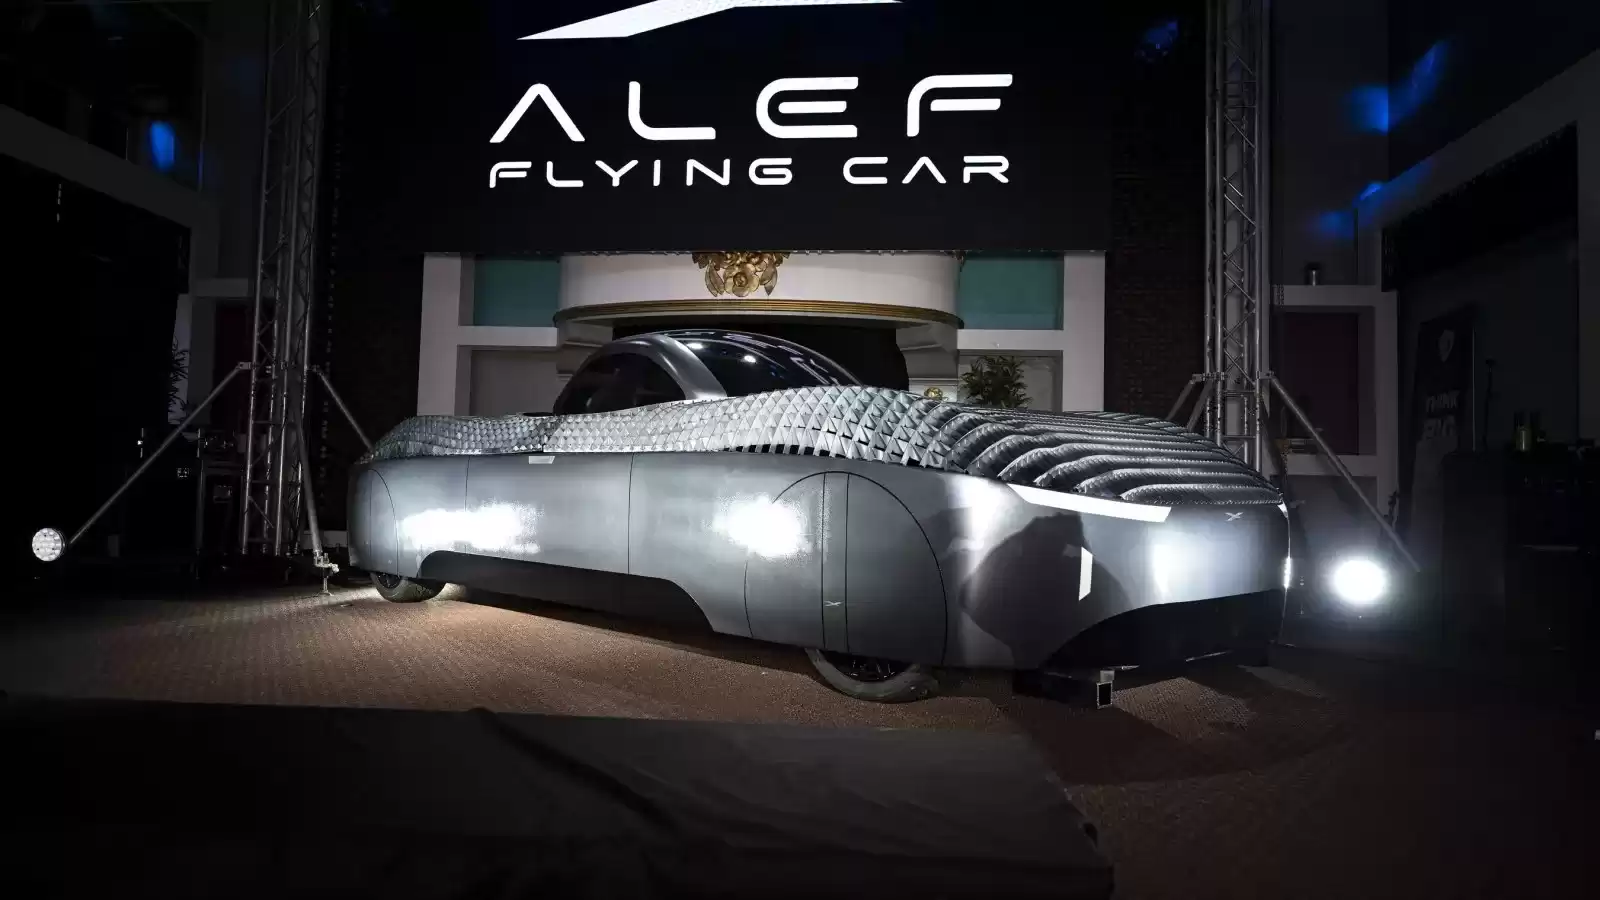 Alef's video unveils the mechanism behind the $300,000 flying car